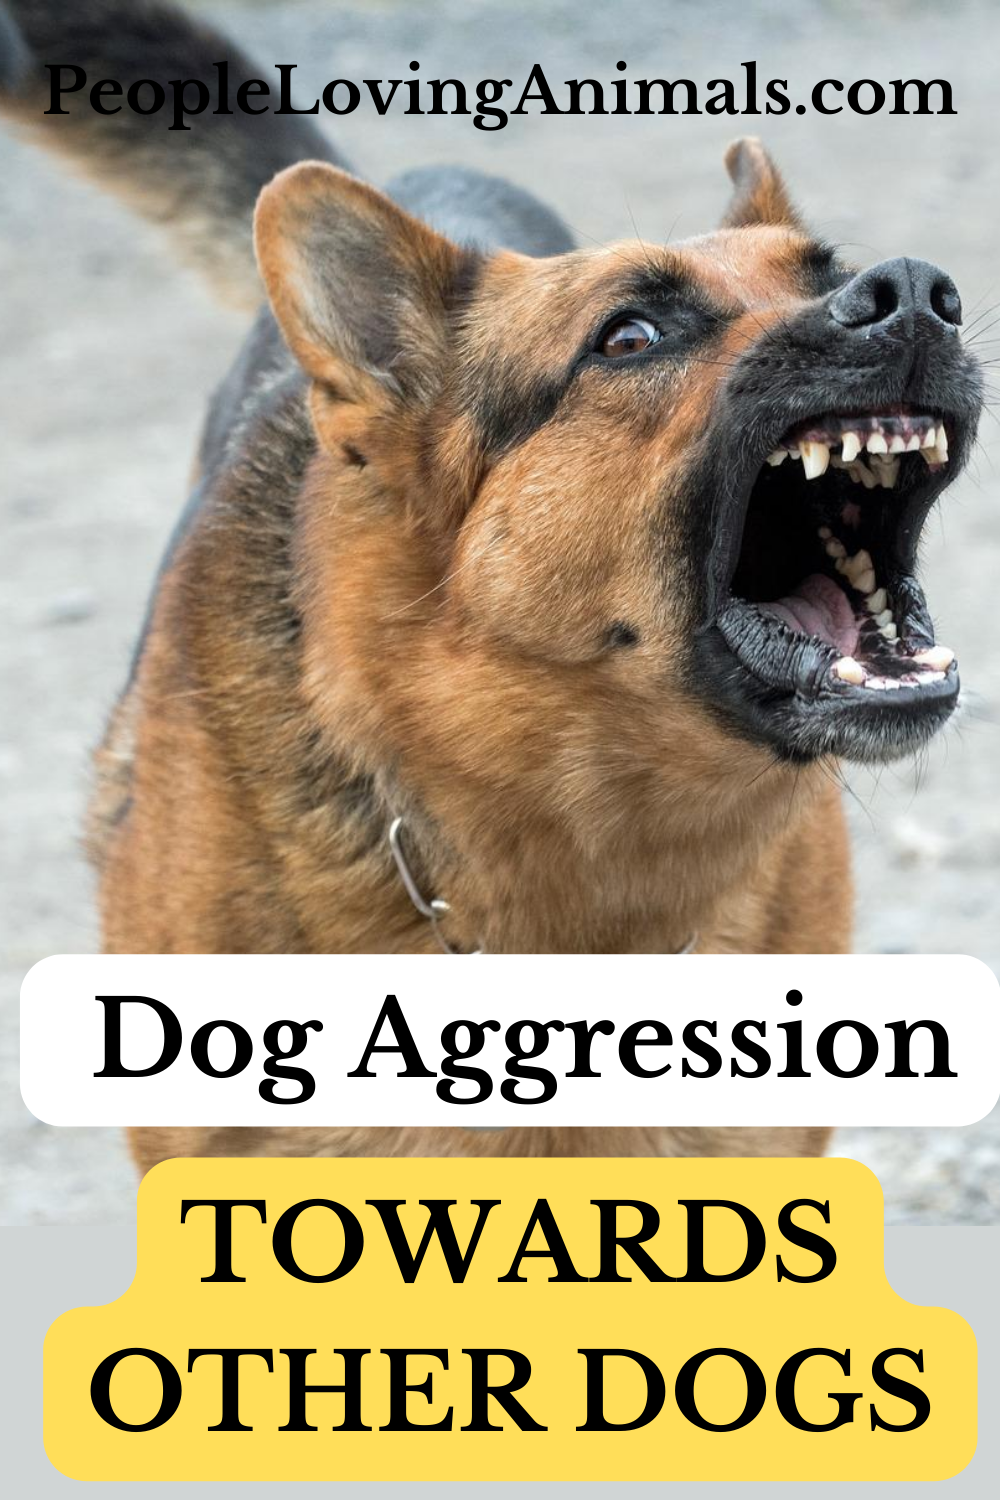 Dog Aggression Towards Other Dogs - The Dog Calming Code